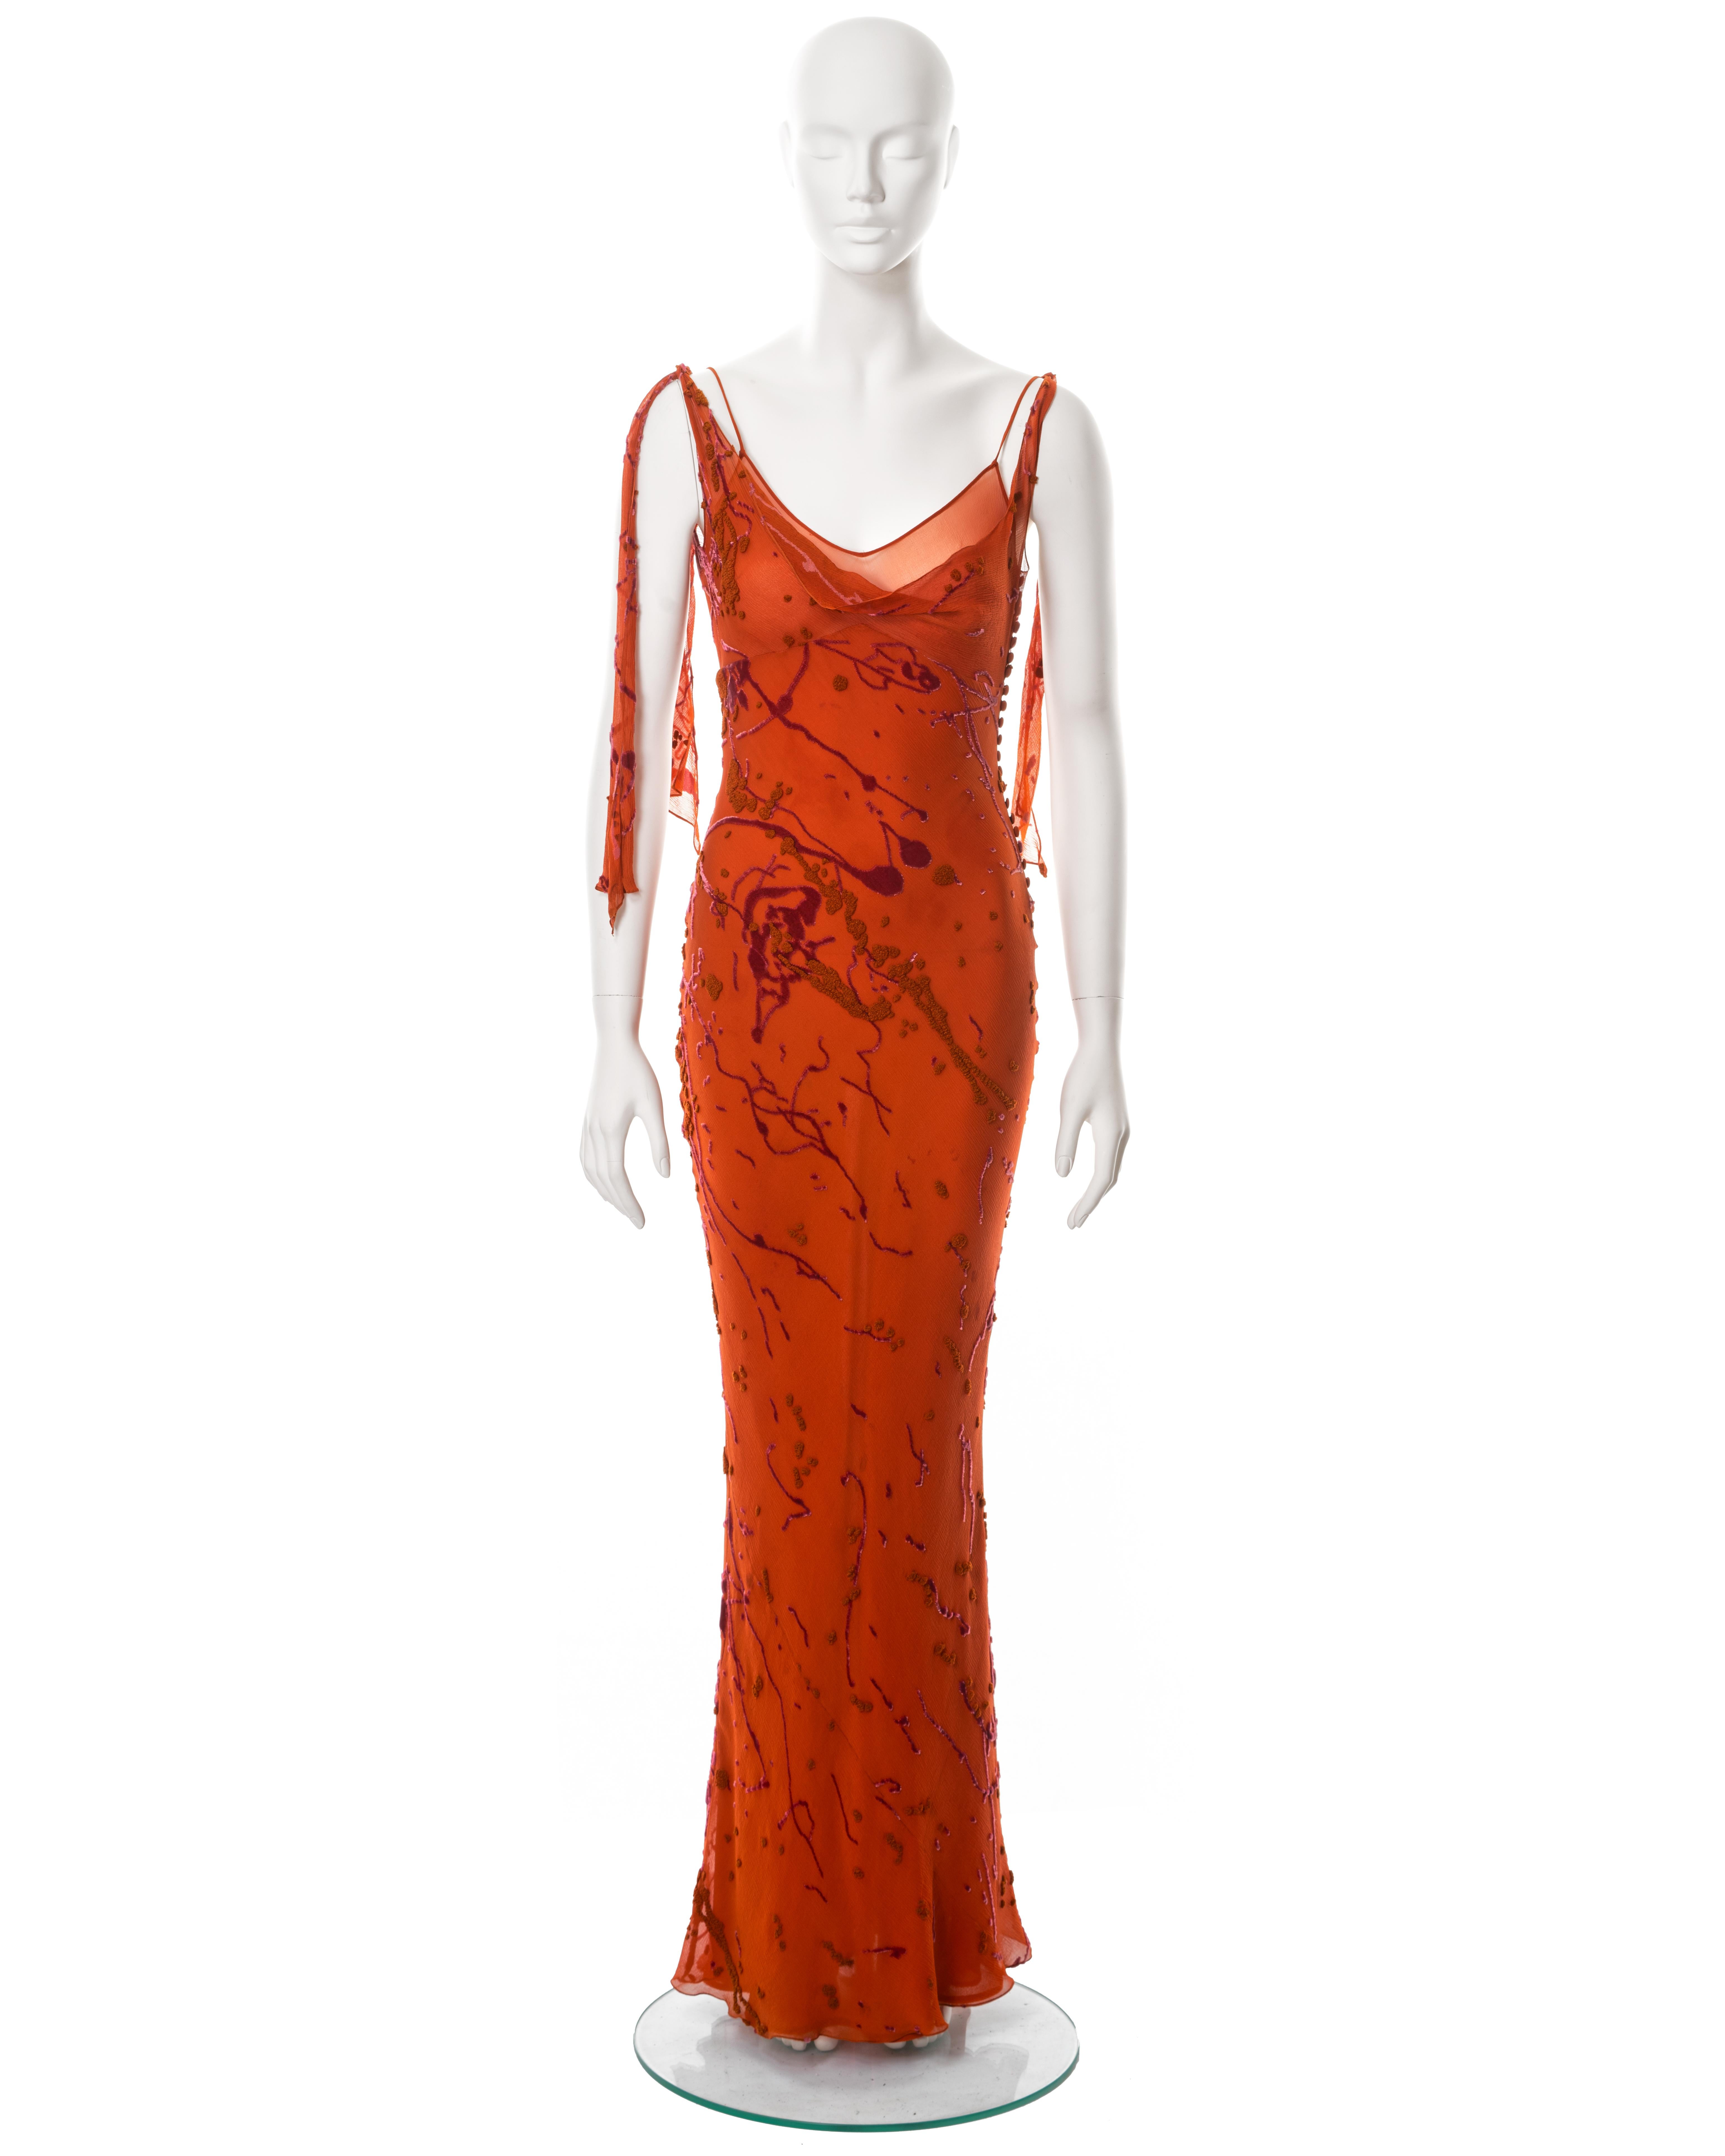 ▪ John Galliano evening dress
▪ Fall-Winter 2000
▪ Constructed from orange bias-cut crinkled silk devoré 
▪ Velvet and French-knot embroidery paint splatter motifs
▪ Silk chiffon underdress 
▪ Cowl neck
▪ 3 Ties knot on the shoulder 
▪ Multiple